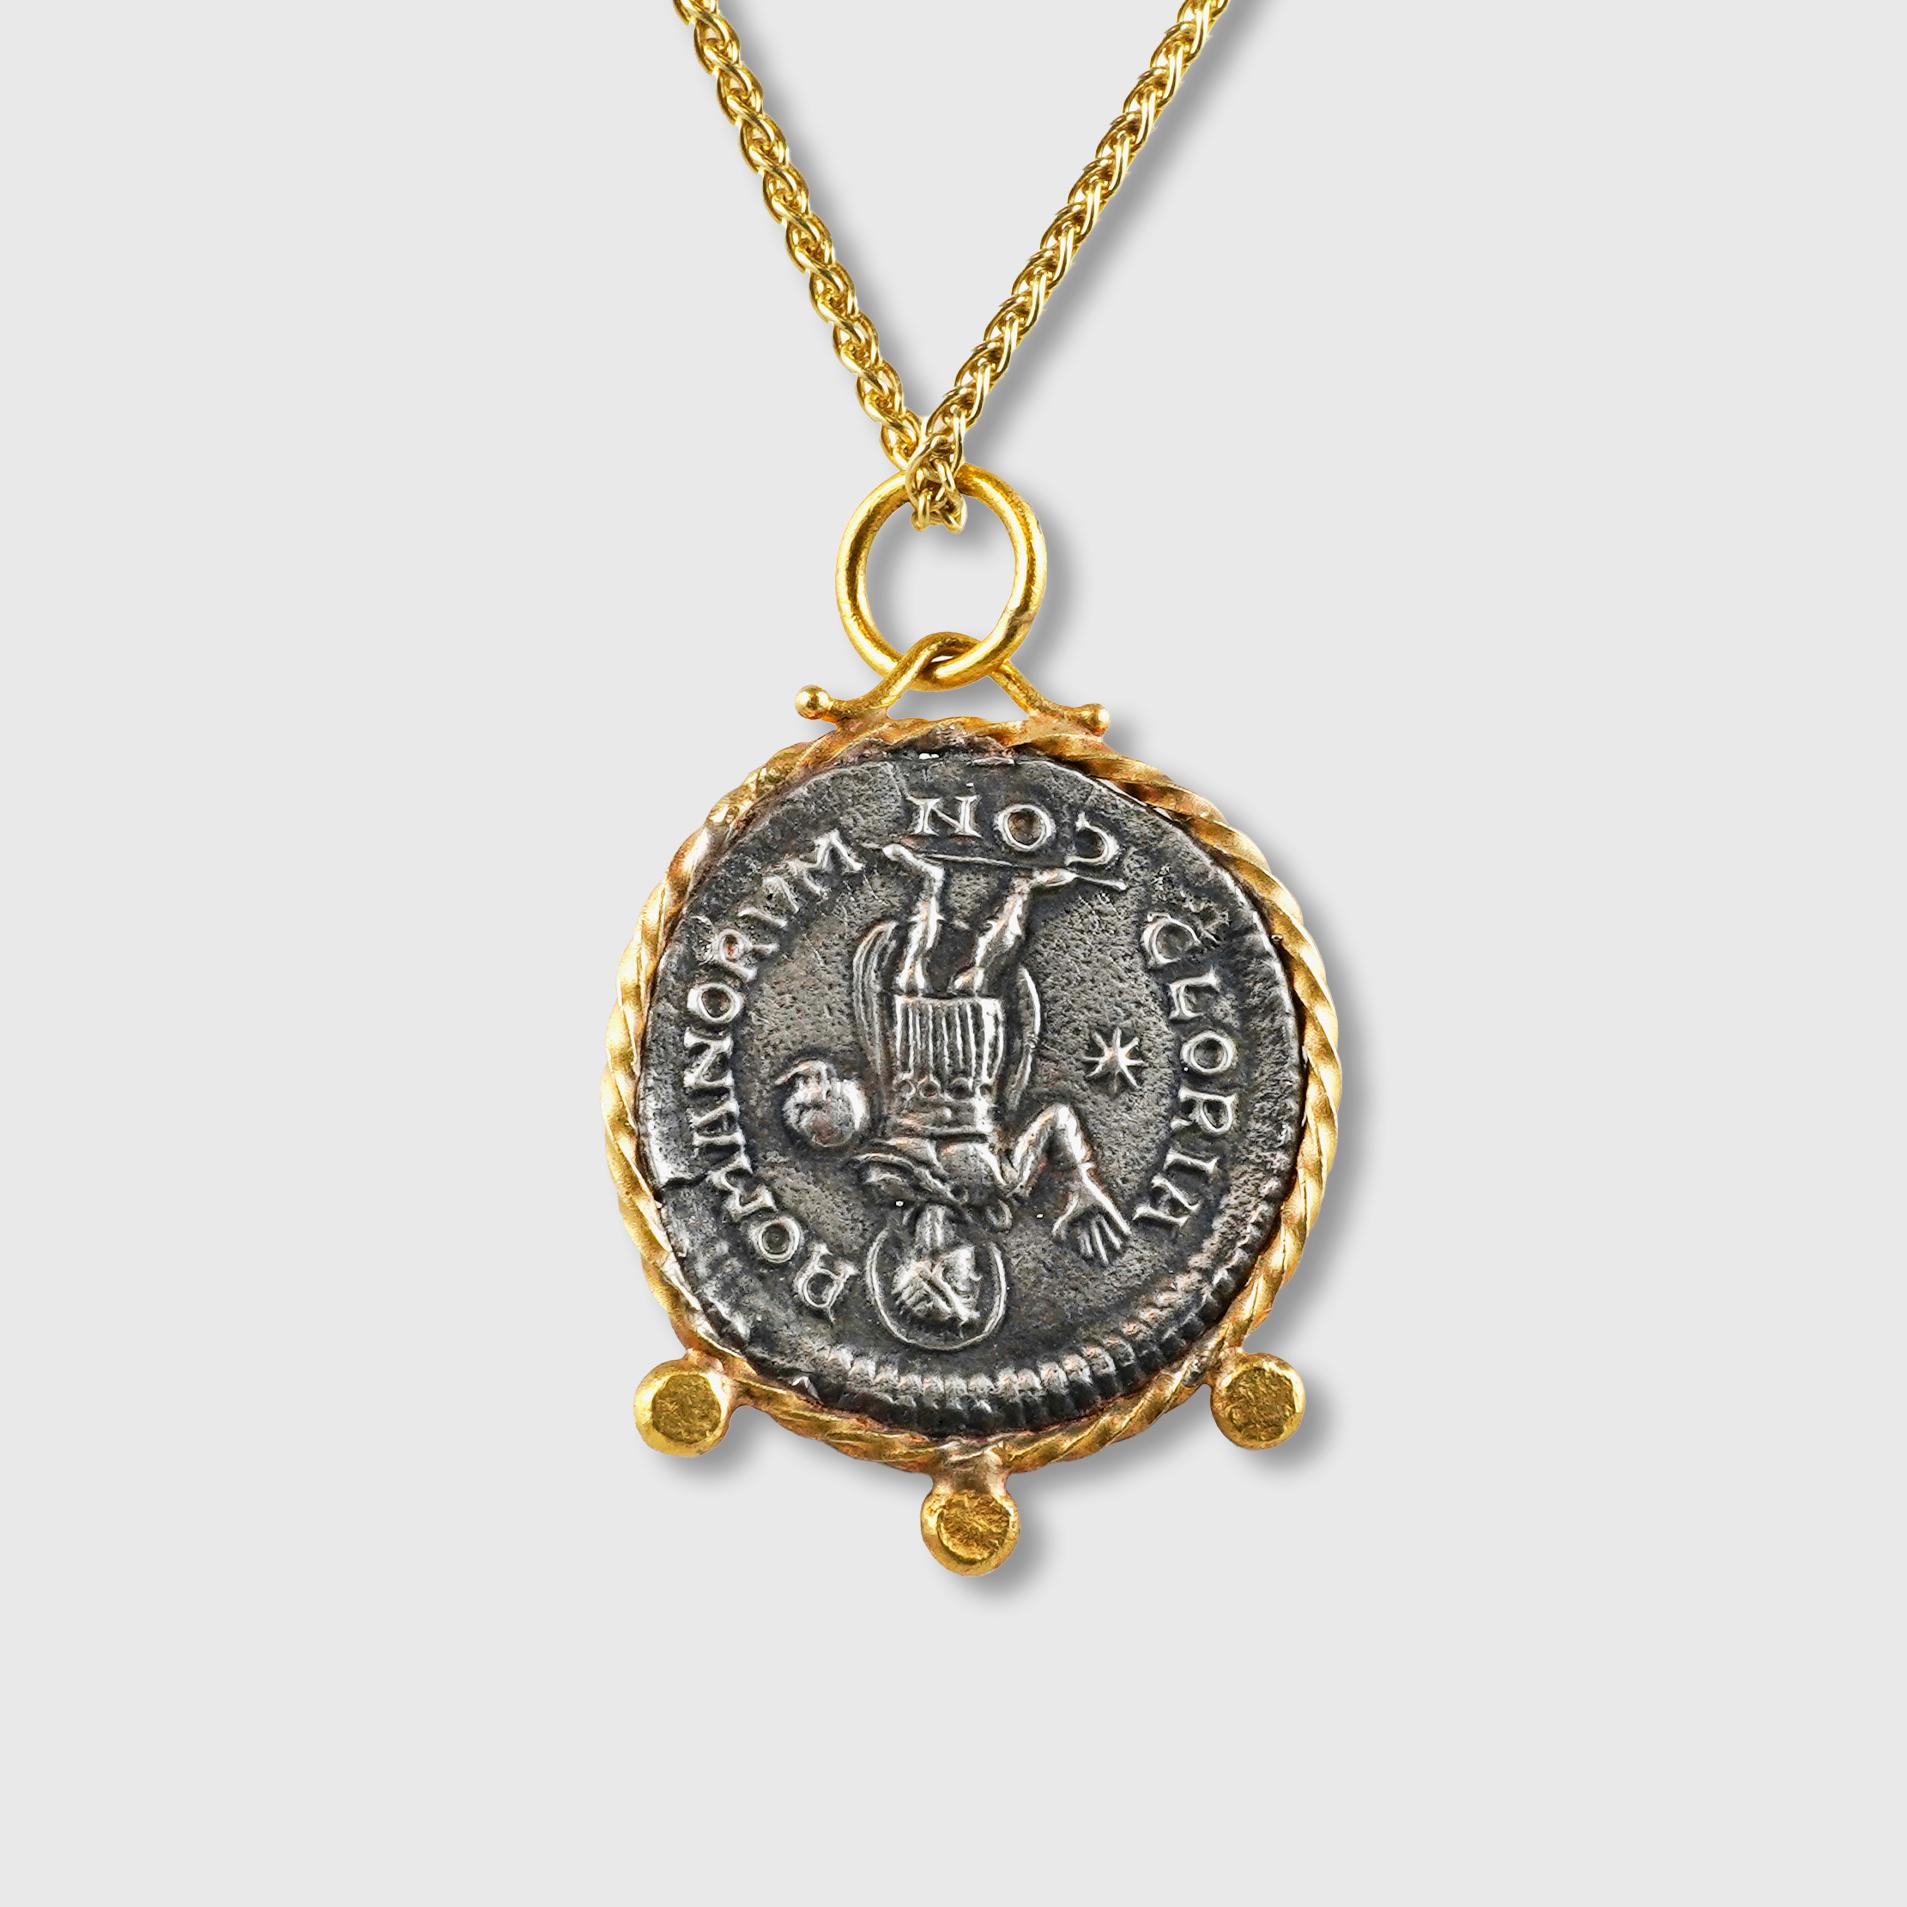 Gold-Framed Ancient Gloria Romanorum (Glory of the Romans), Tetradrachm Coin (Replica) Charm Pendant, 24kt Gold, Silver & 0.06ct Diamonds

Sterling Silver coin is a replica coin from those in the Turkish Museum.

Diamonds - 0.06ct
24kt Gold - 1.91